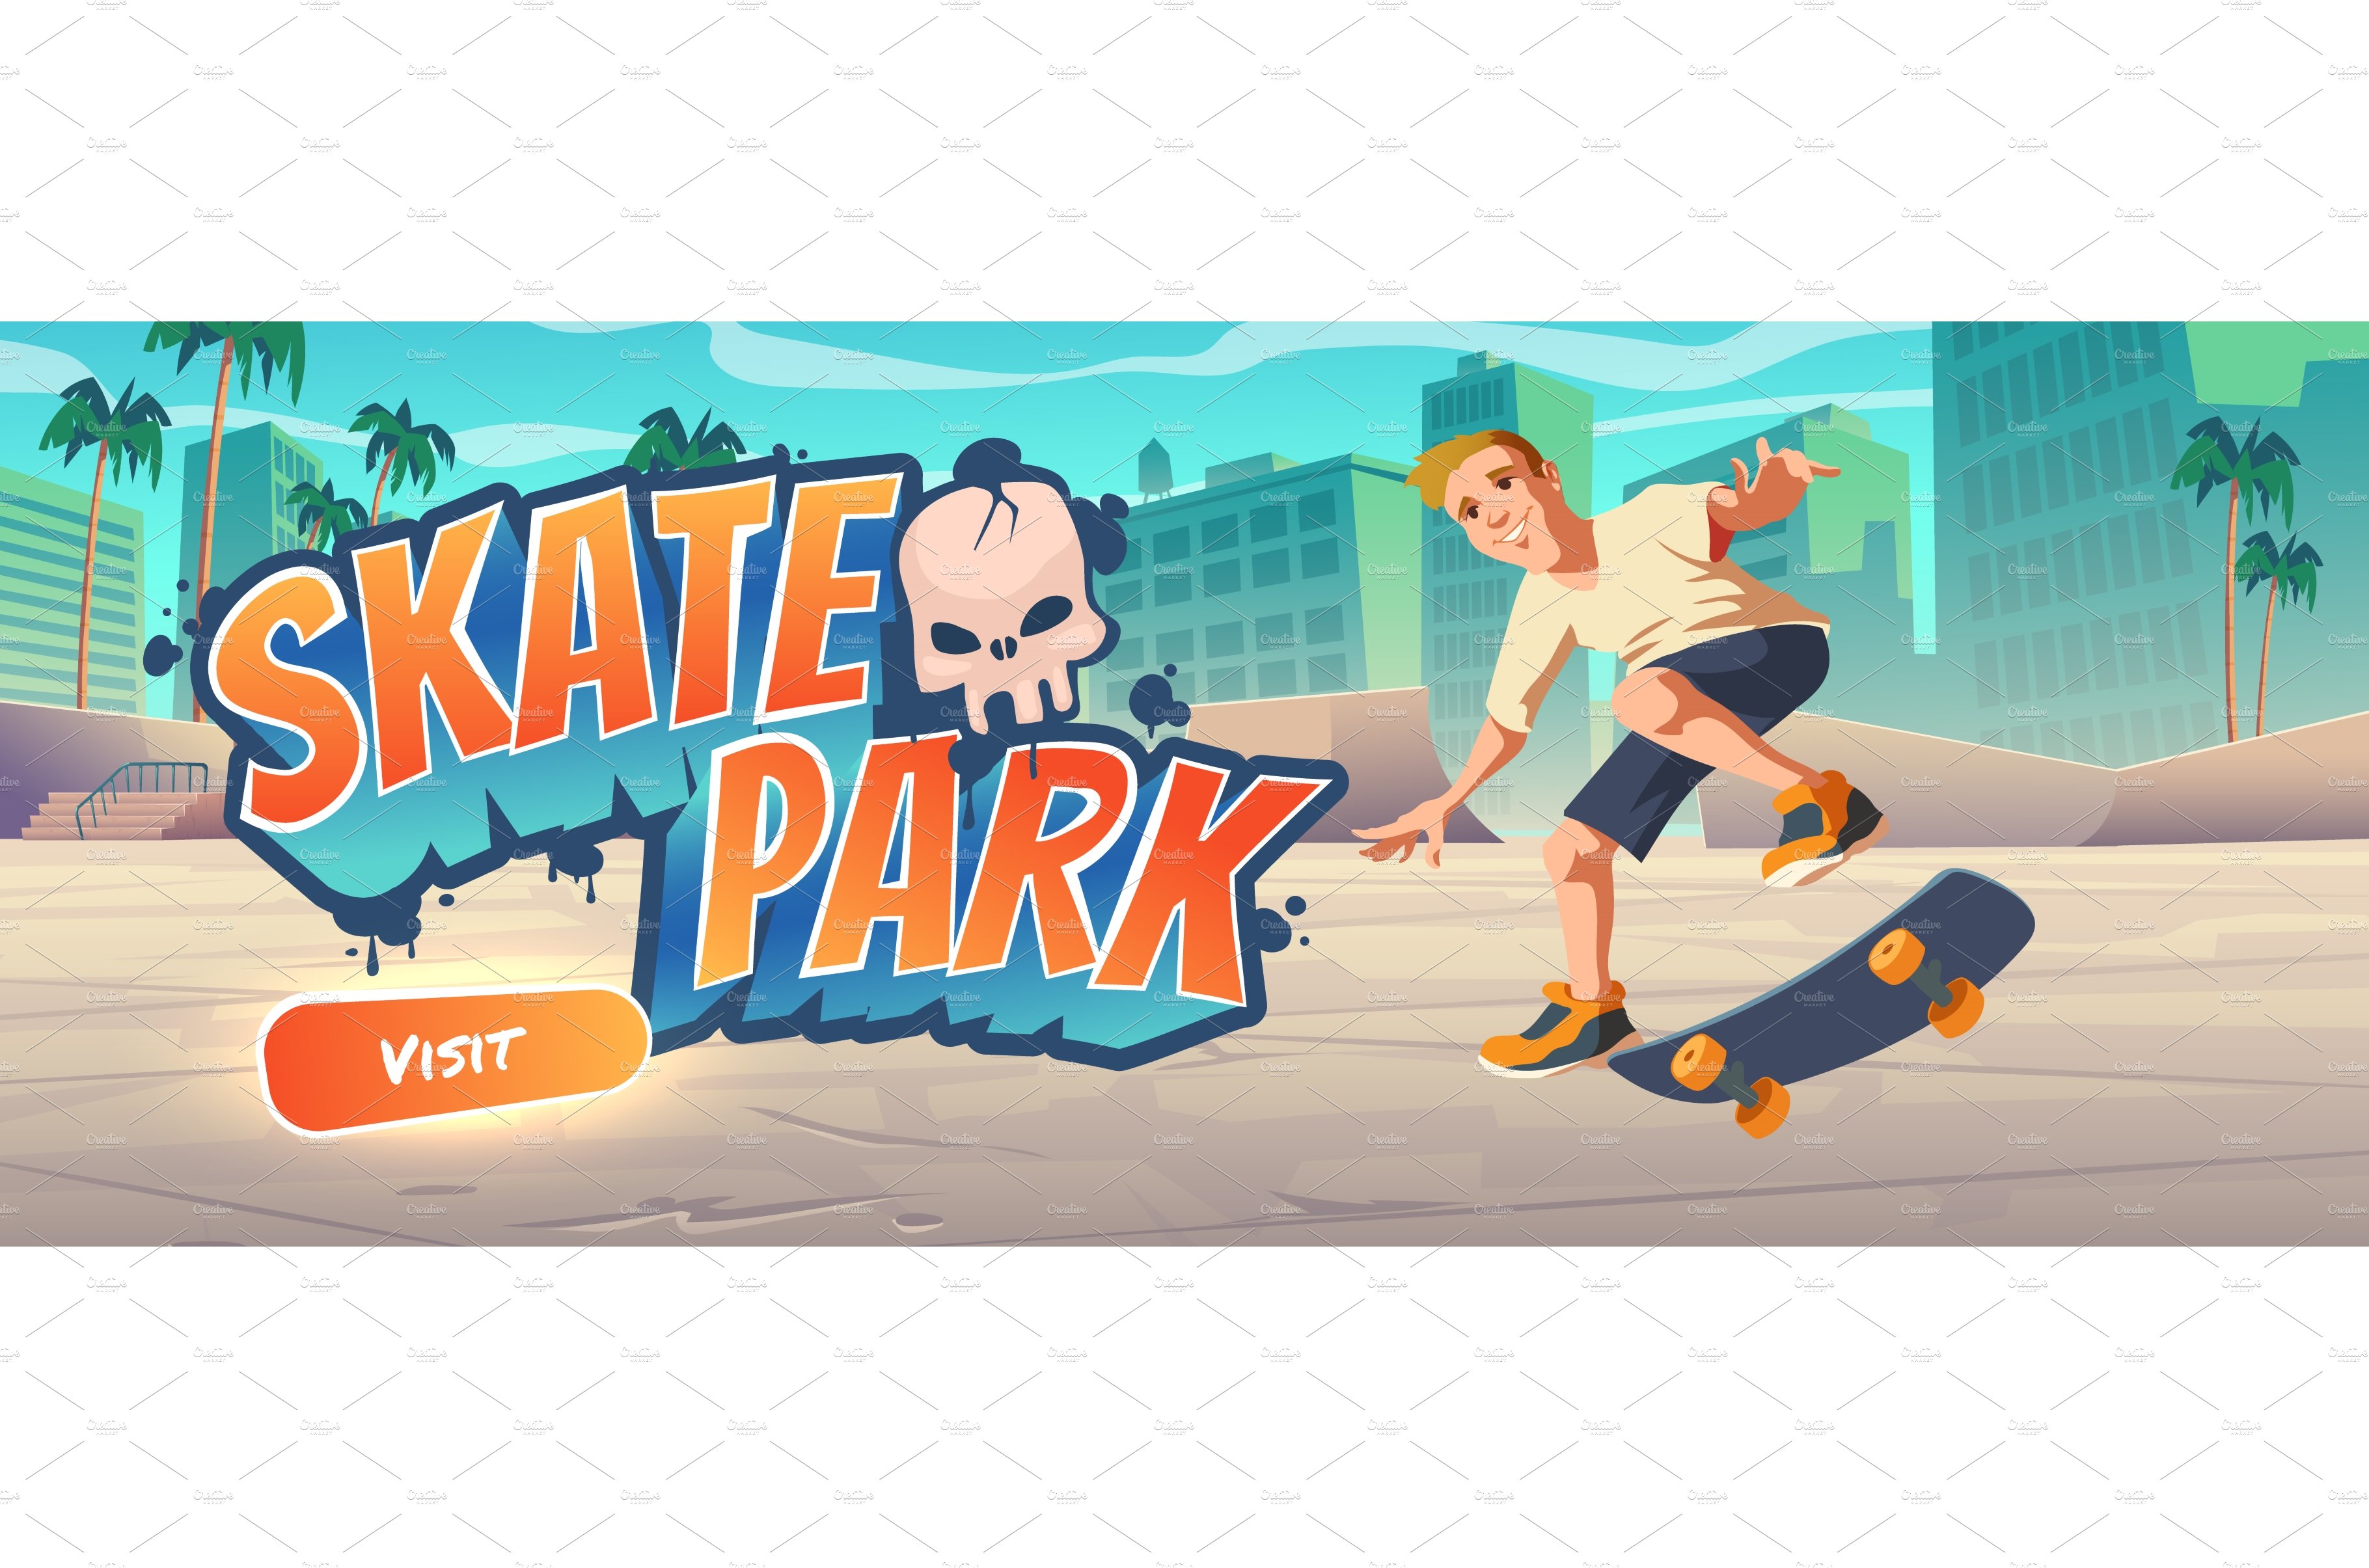 Skate park cartoon landing page with cover image.